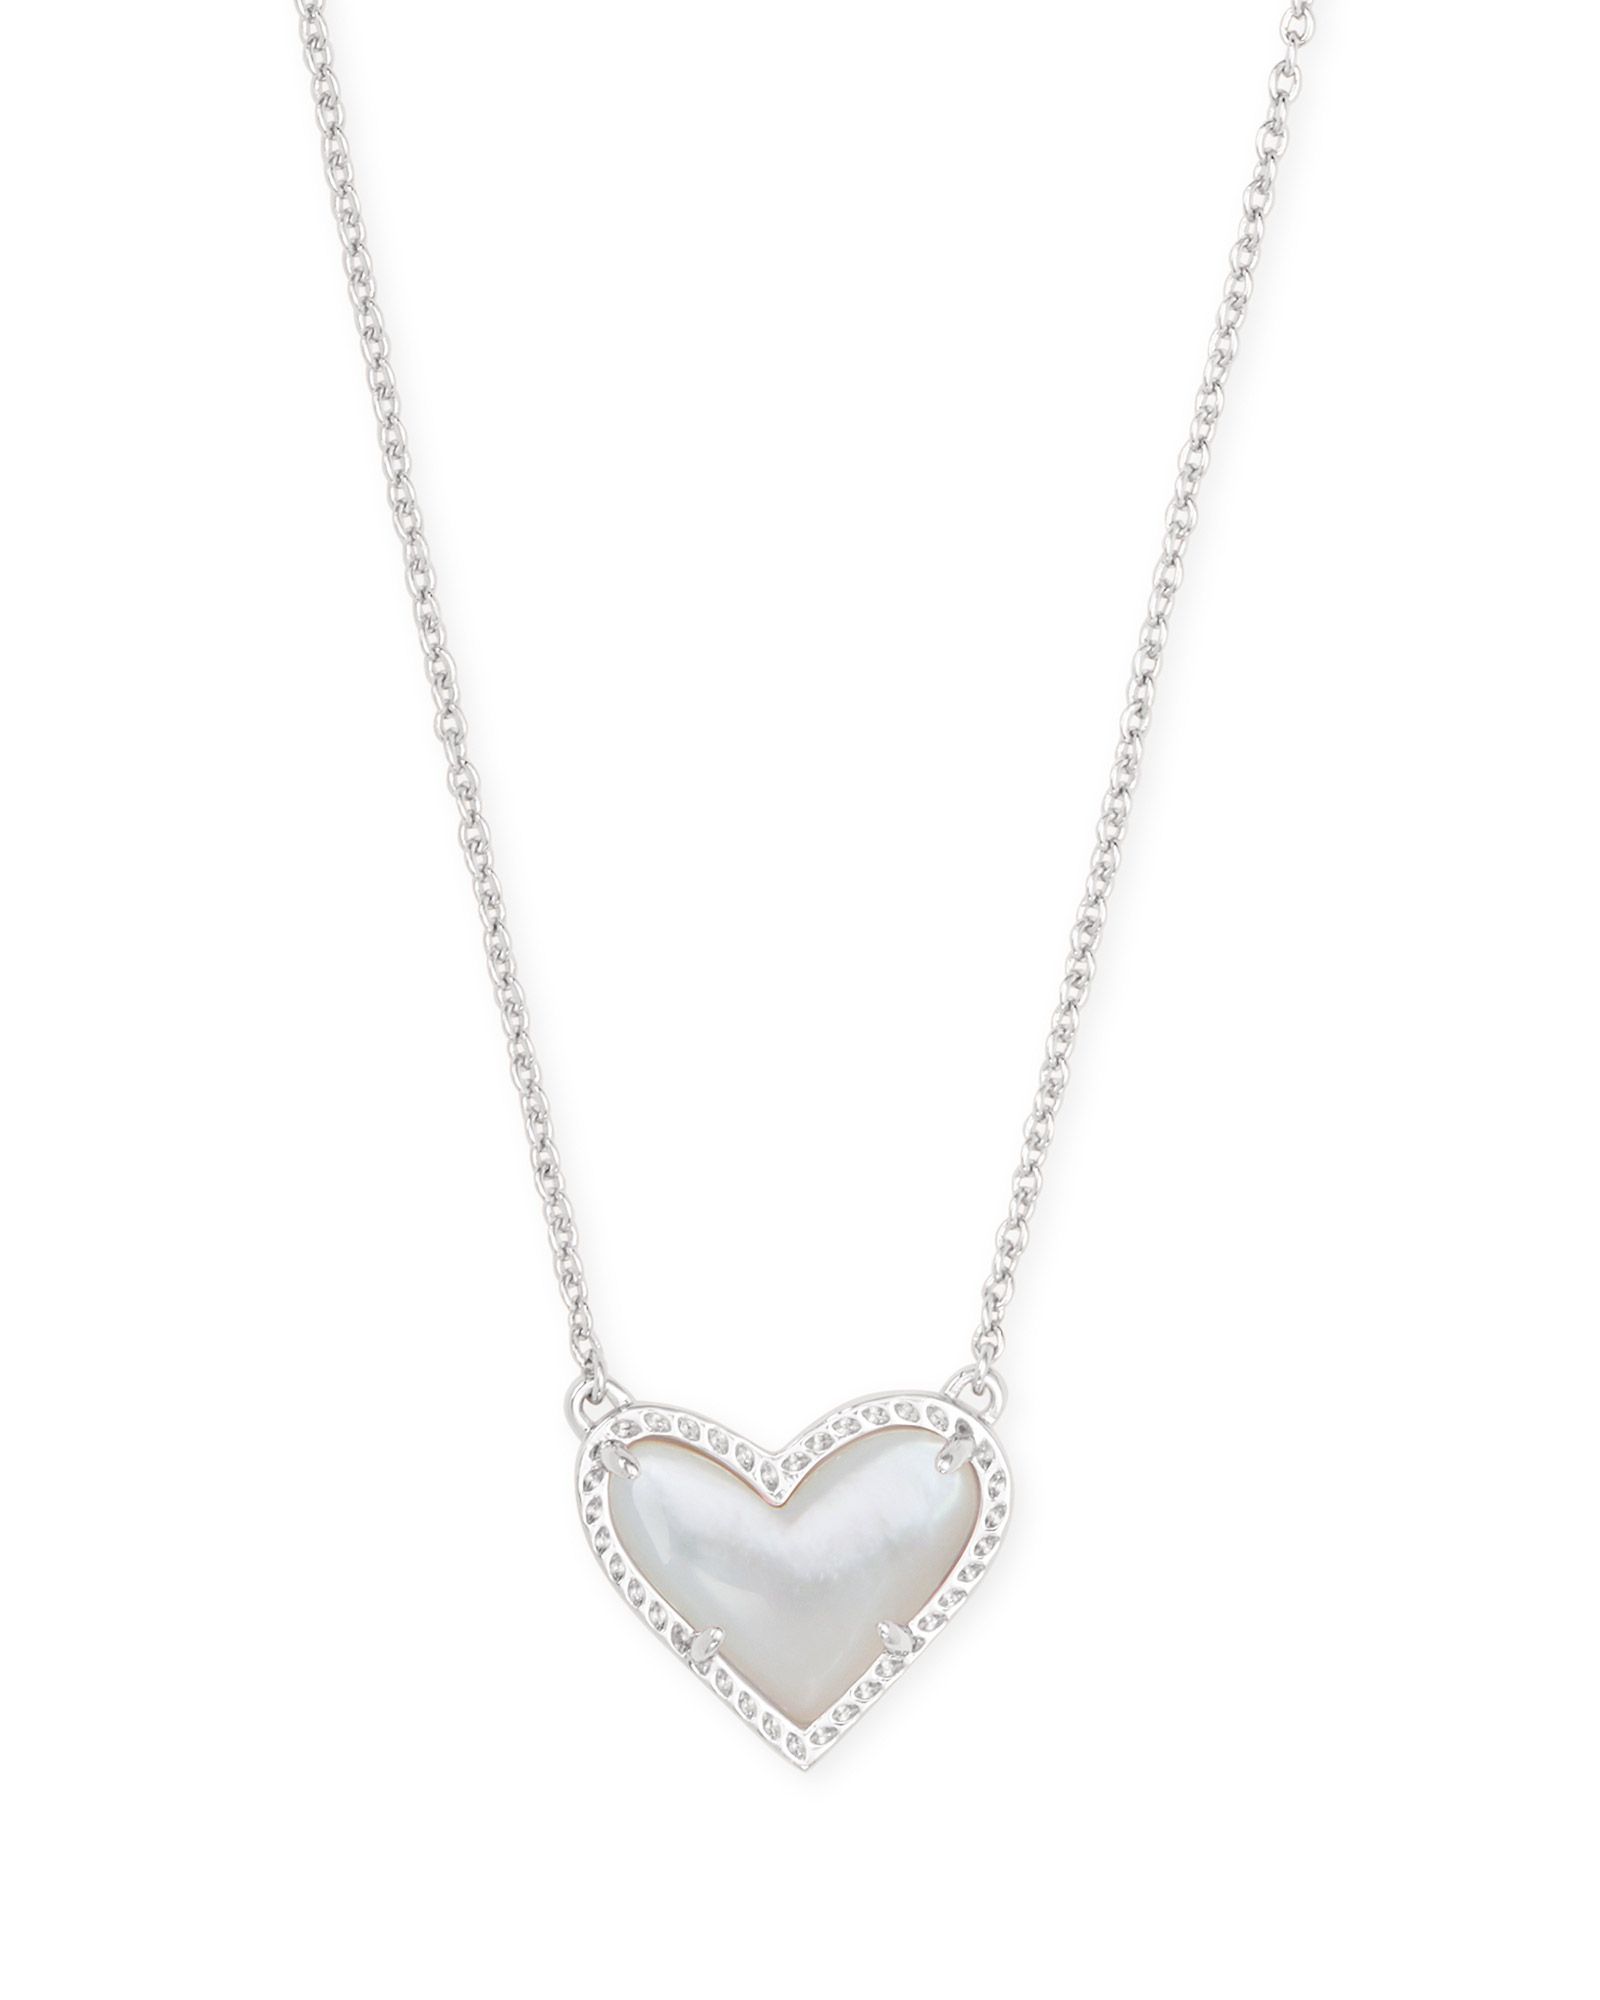 Ari Heart Silver Short Pendant Necklace in Ivory Mother-of-Pearl | Kendra Scott